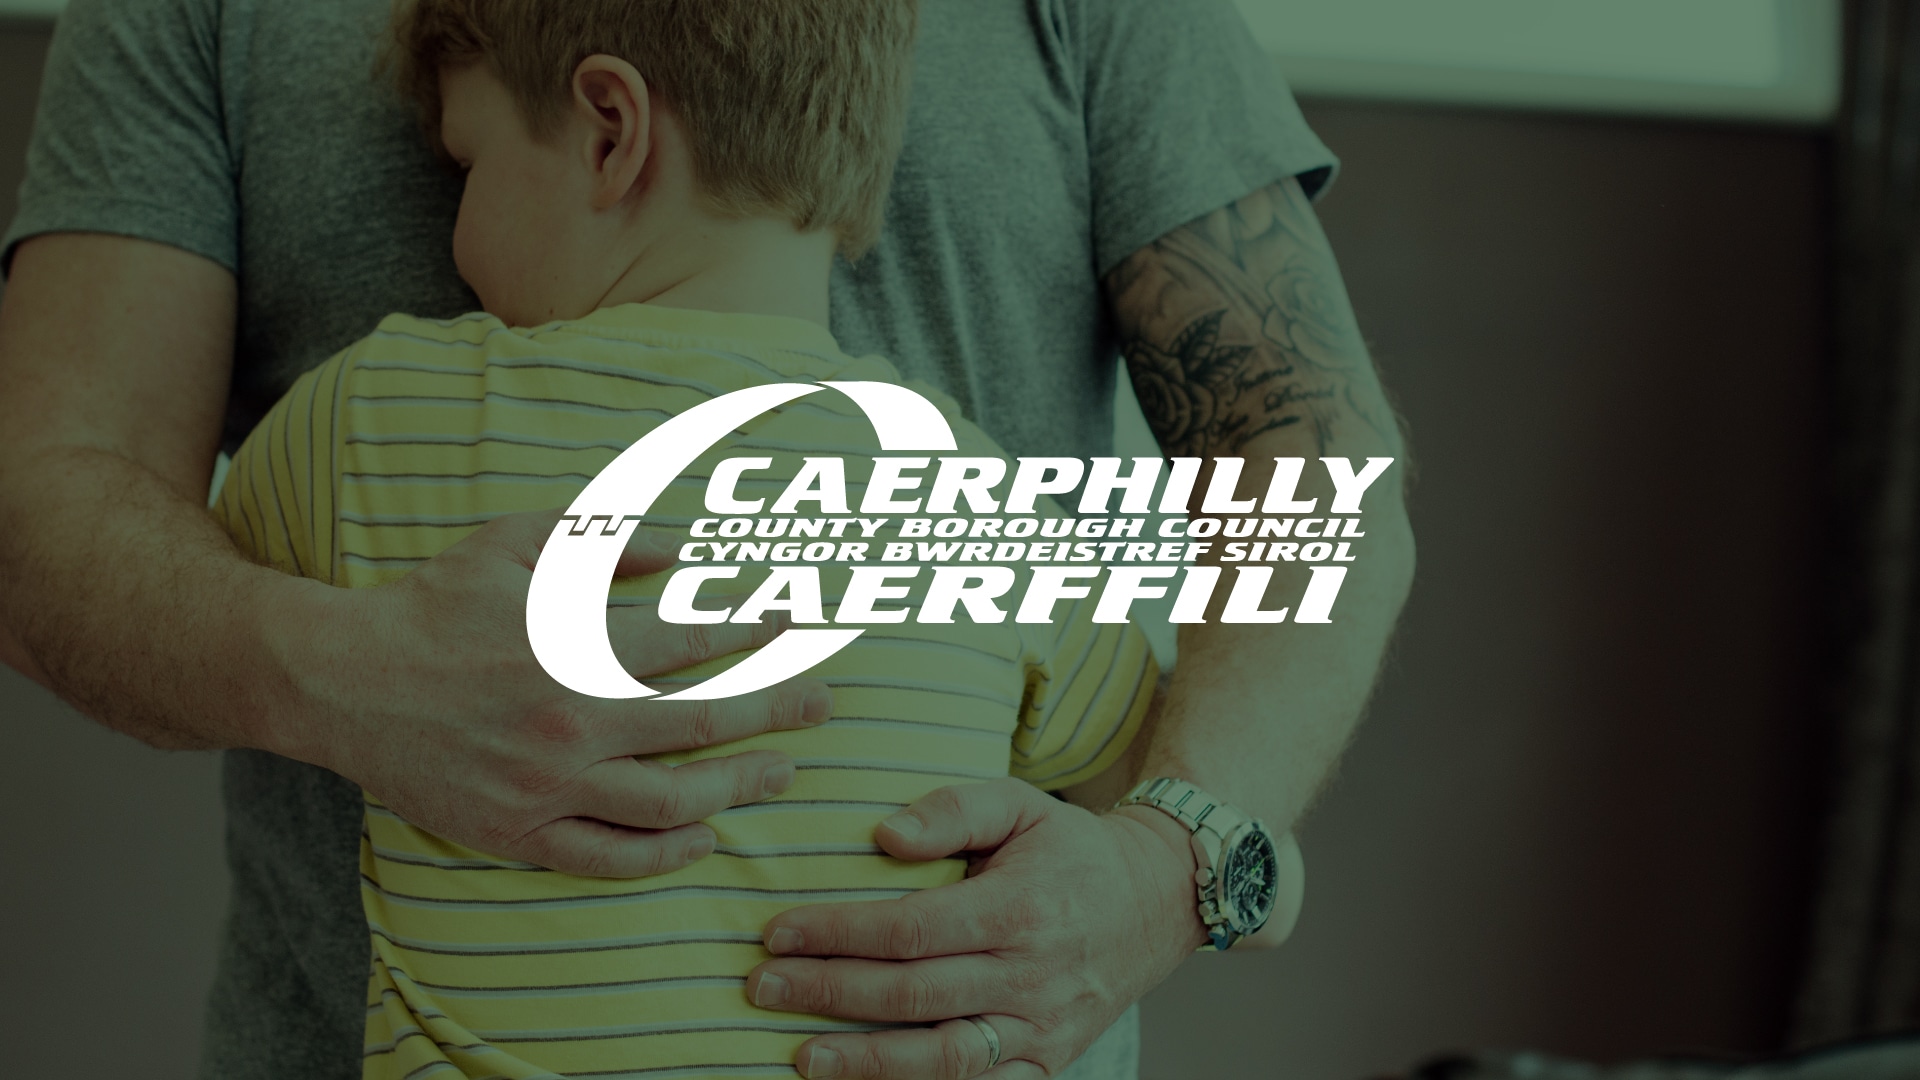 An image of a child embracing an adult overlapped by the Caerphilly Council logo